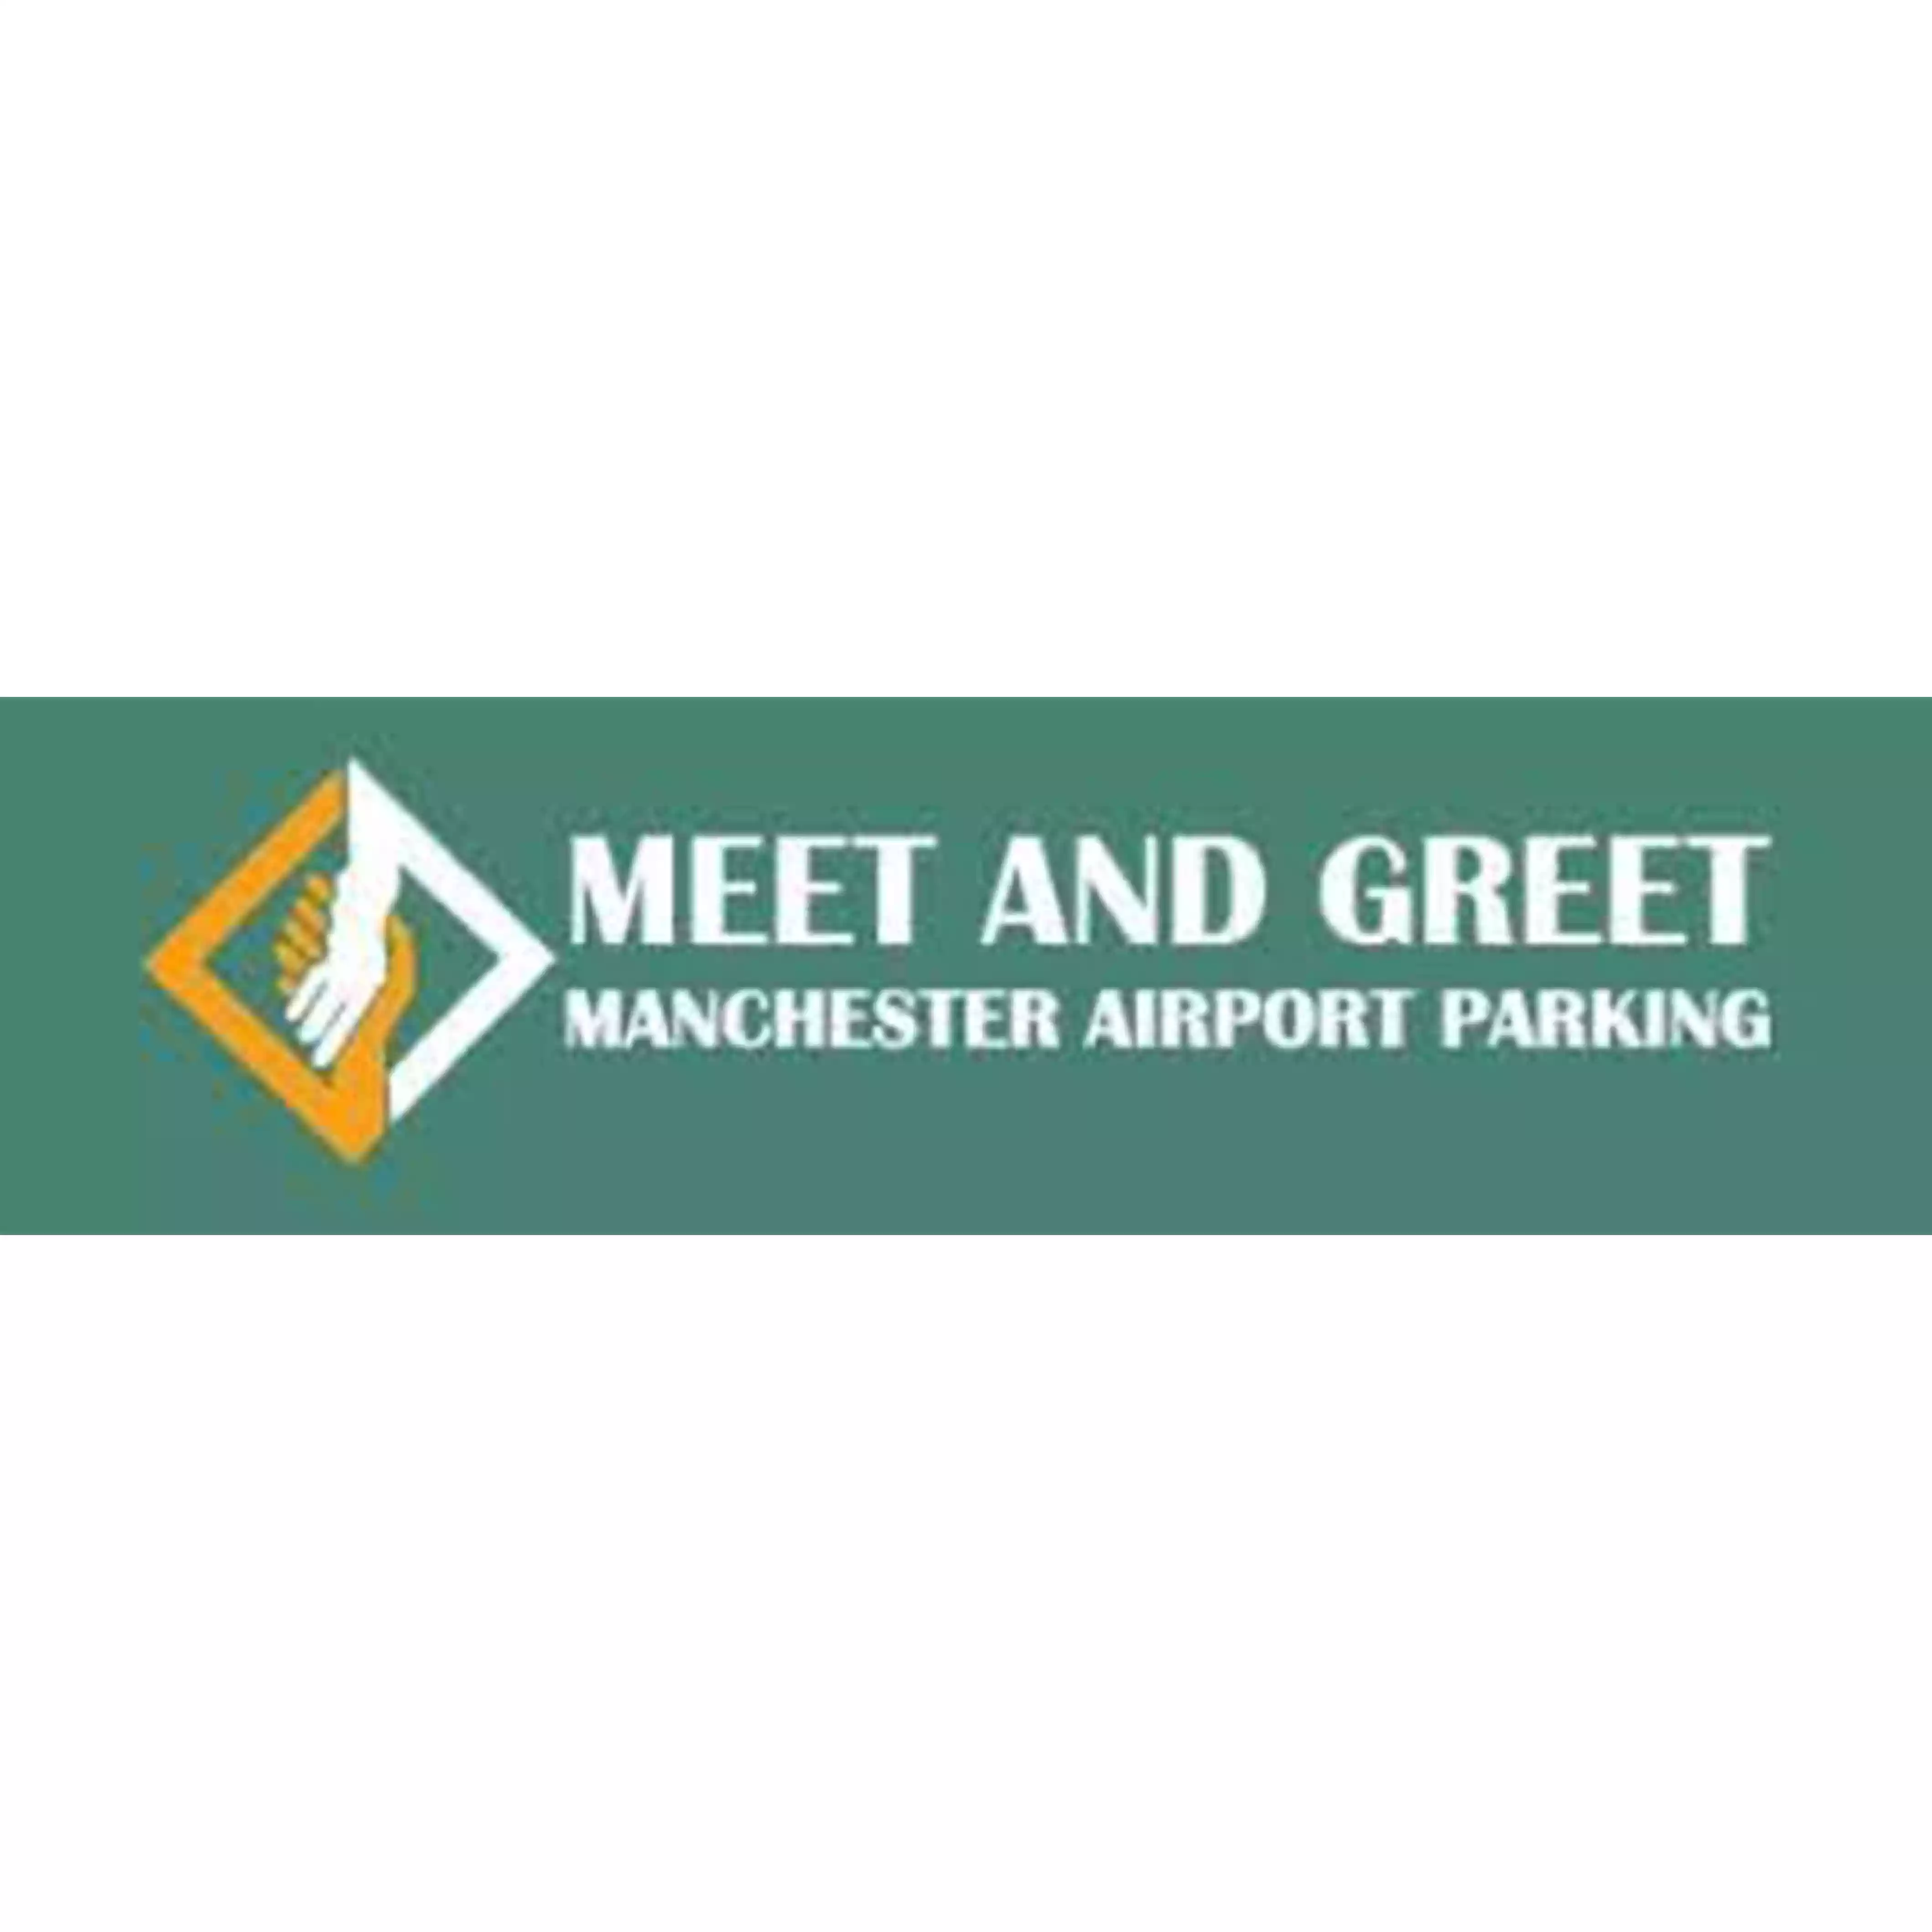 Meet And Greet Manchester Airport Parking coupon codes